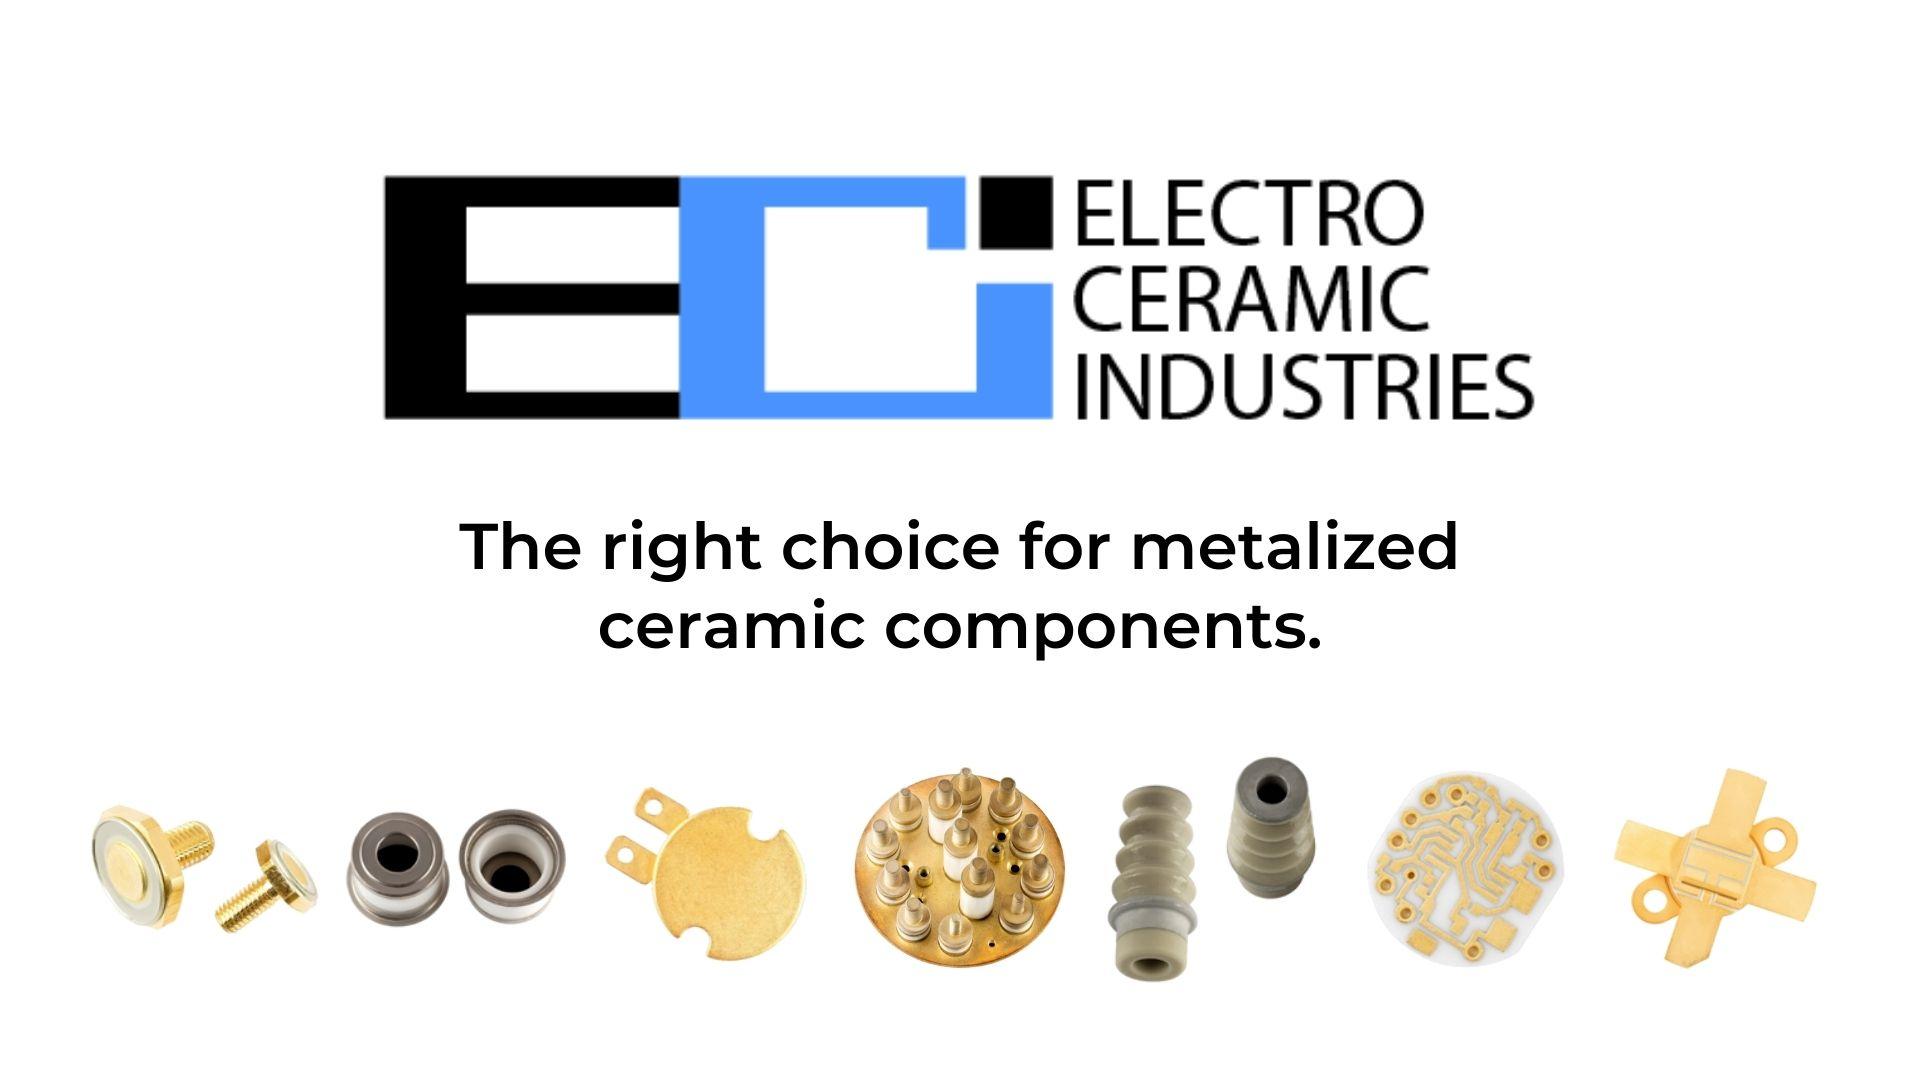 Product Products | Electro Ceramic Industries image